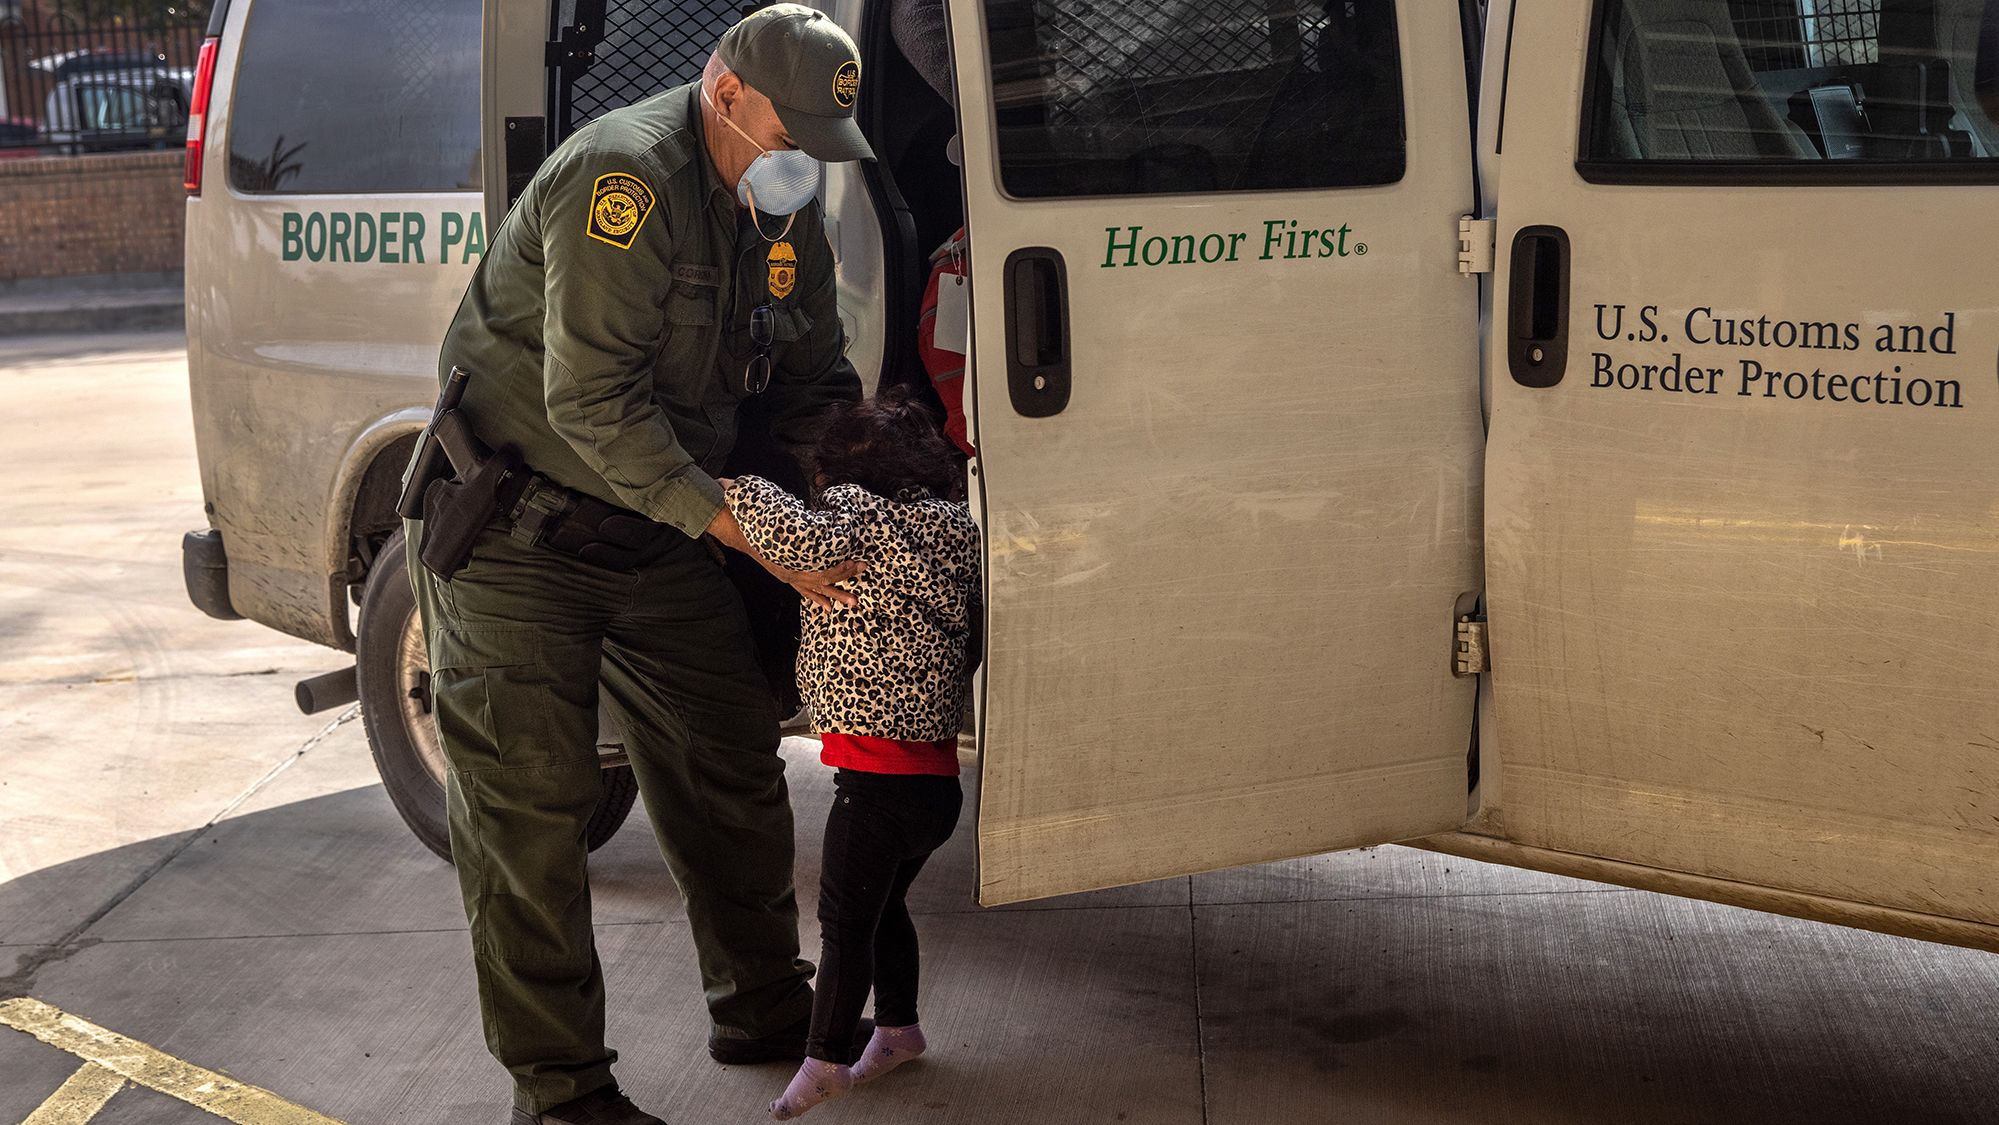 A US Border Patrol agent releases a young asylum seeker with her family at a bus station on February 25, 2021 in Brownsville, Texas. 